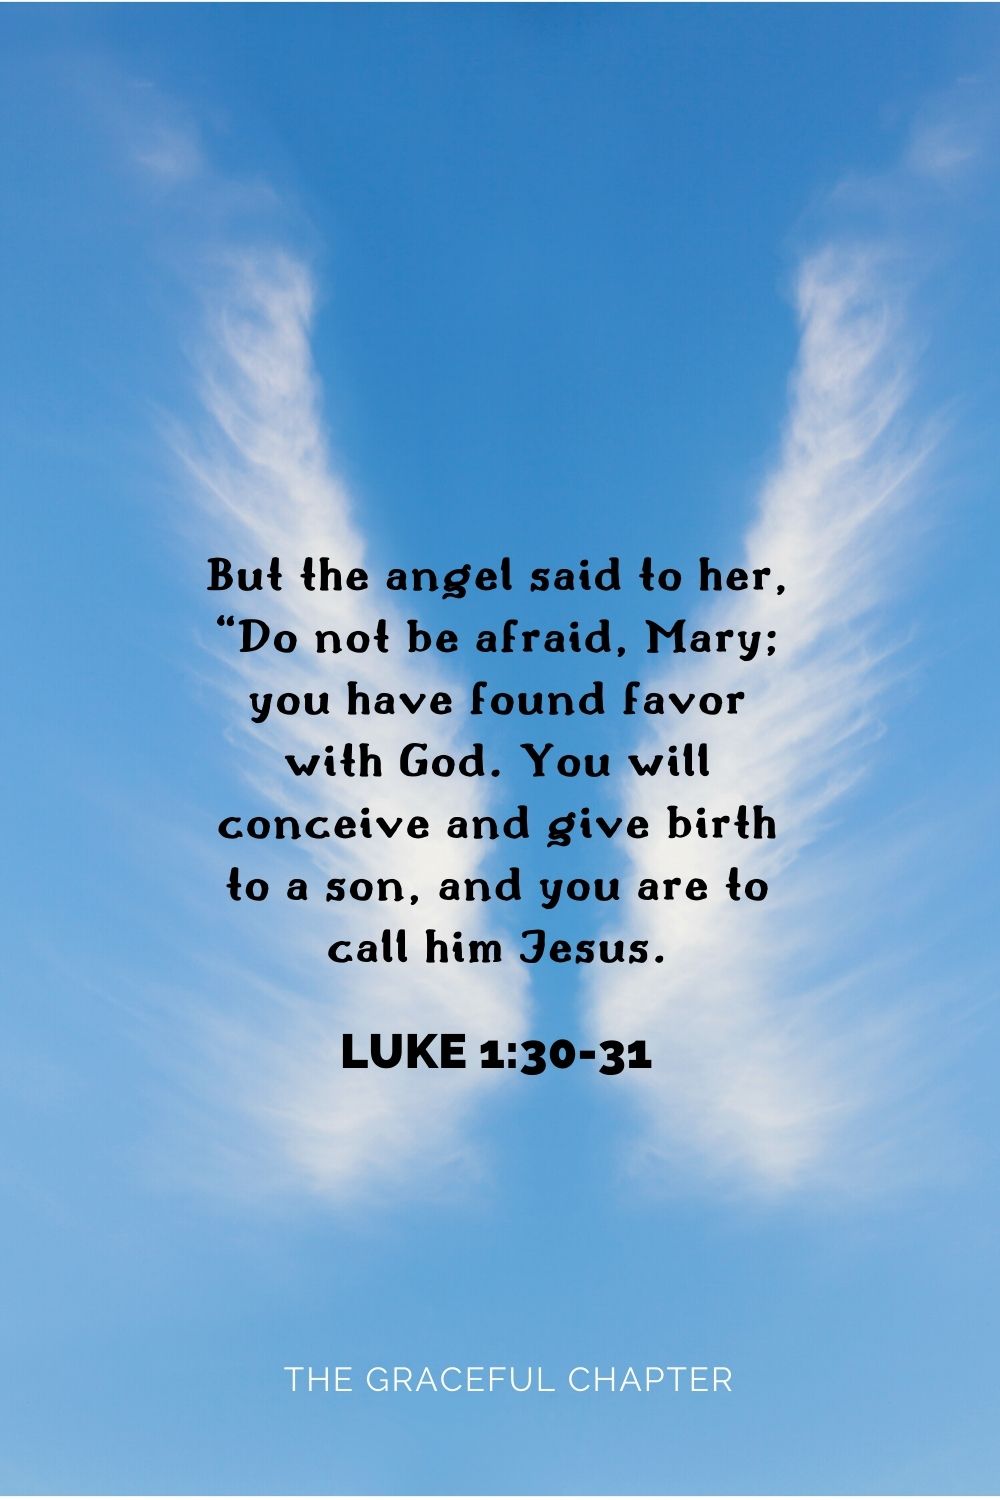 But the angel said to her, “Do not be afraid, Mary; you have found favor with God. You will conceive and give birth to a son, and you are to call him Jesus. Luke 1:30-31